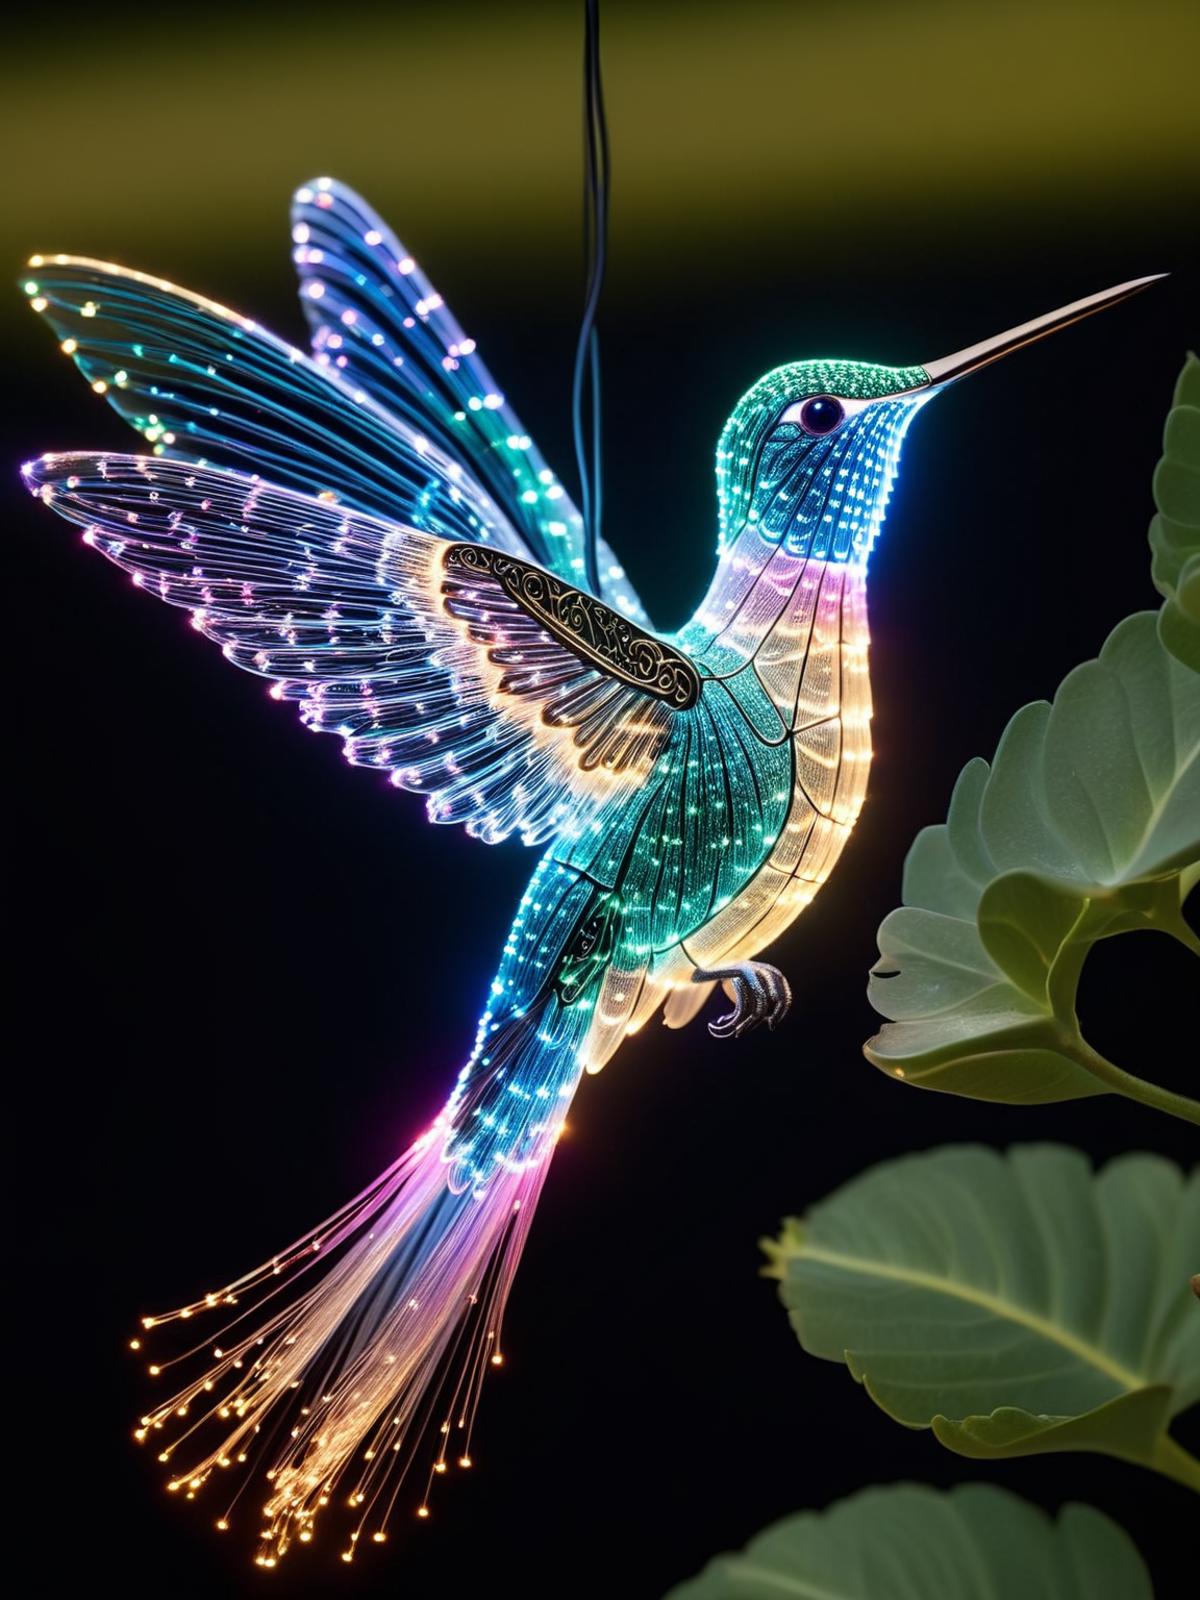 Lighted Blue and Green Hummingbird Decoration in Dark Background